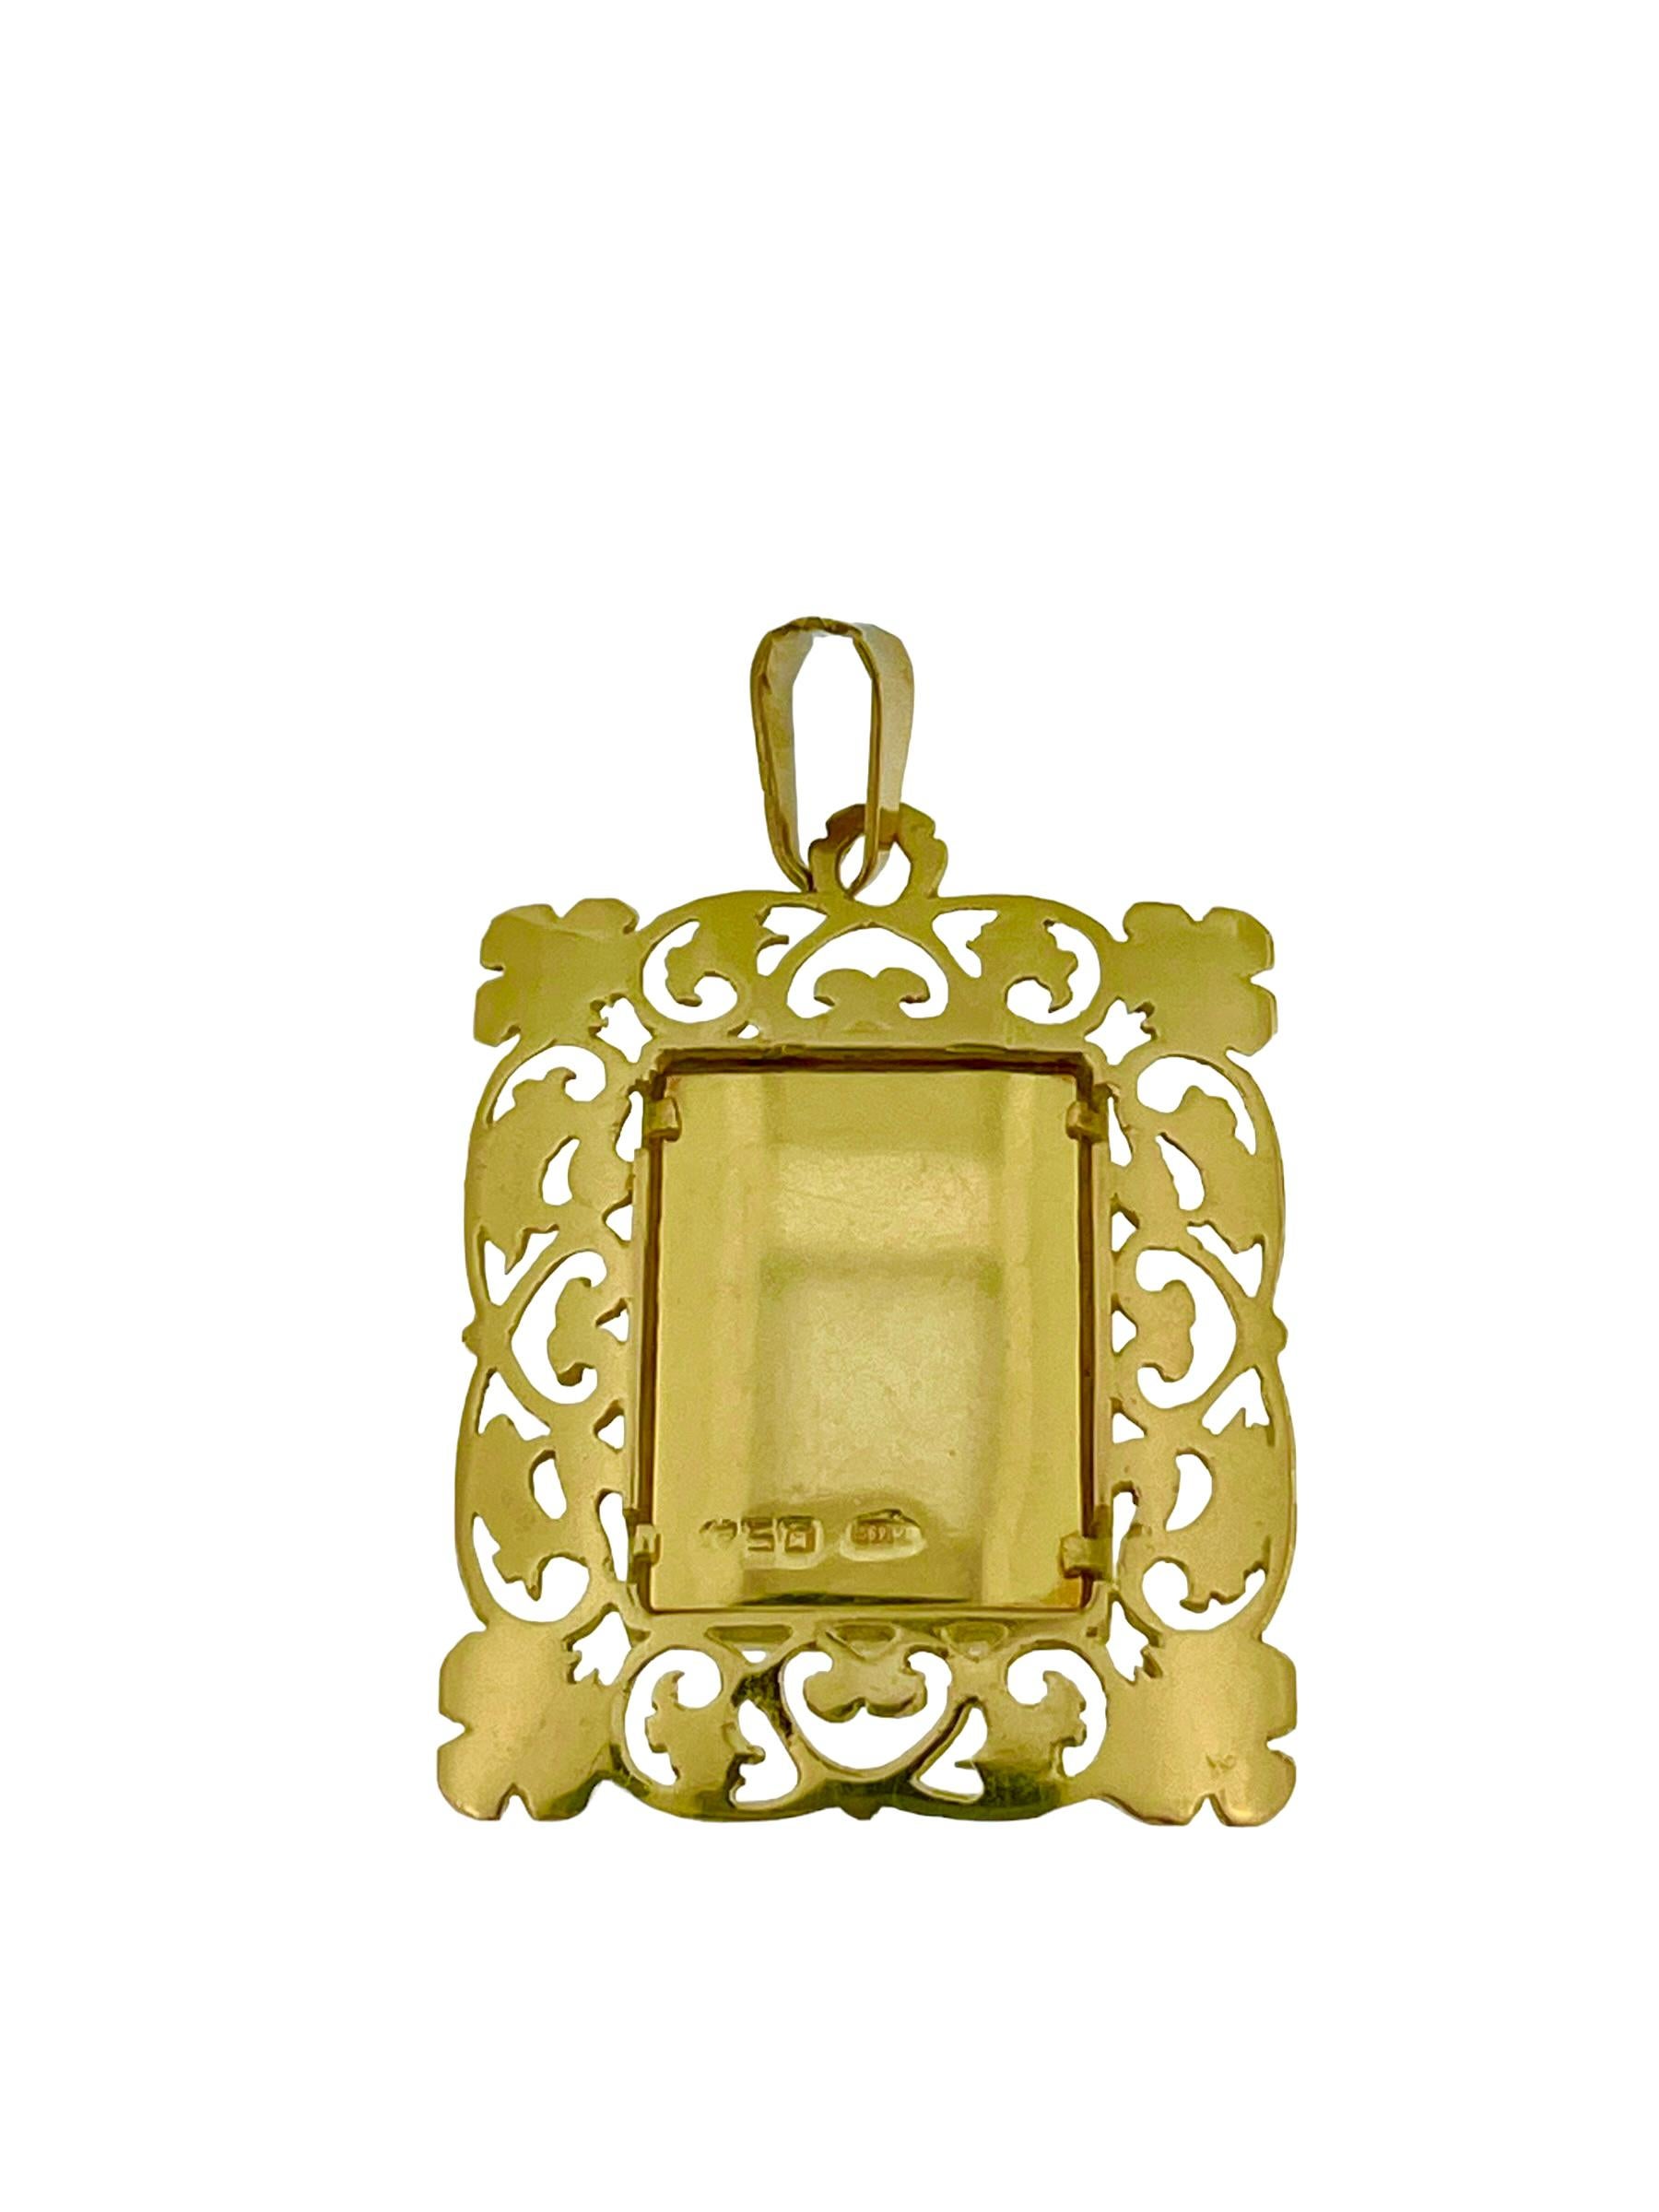 Antique Yellow Gold Pendant representing Raphael's Madonna of the Goldfinch For Sale 2